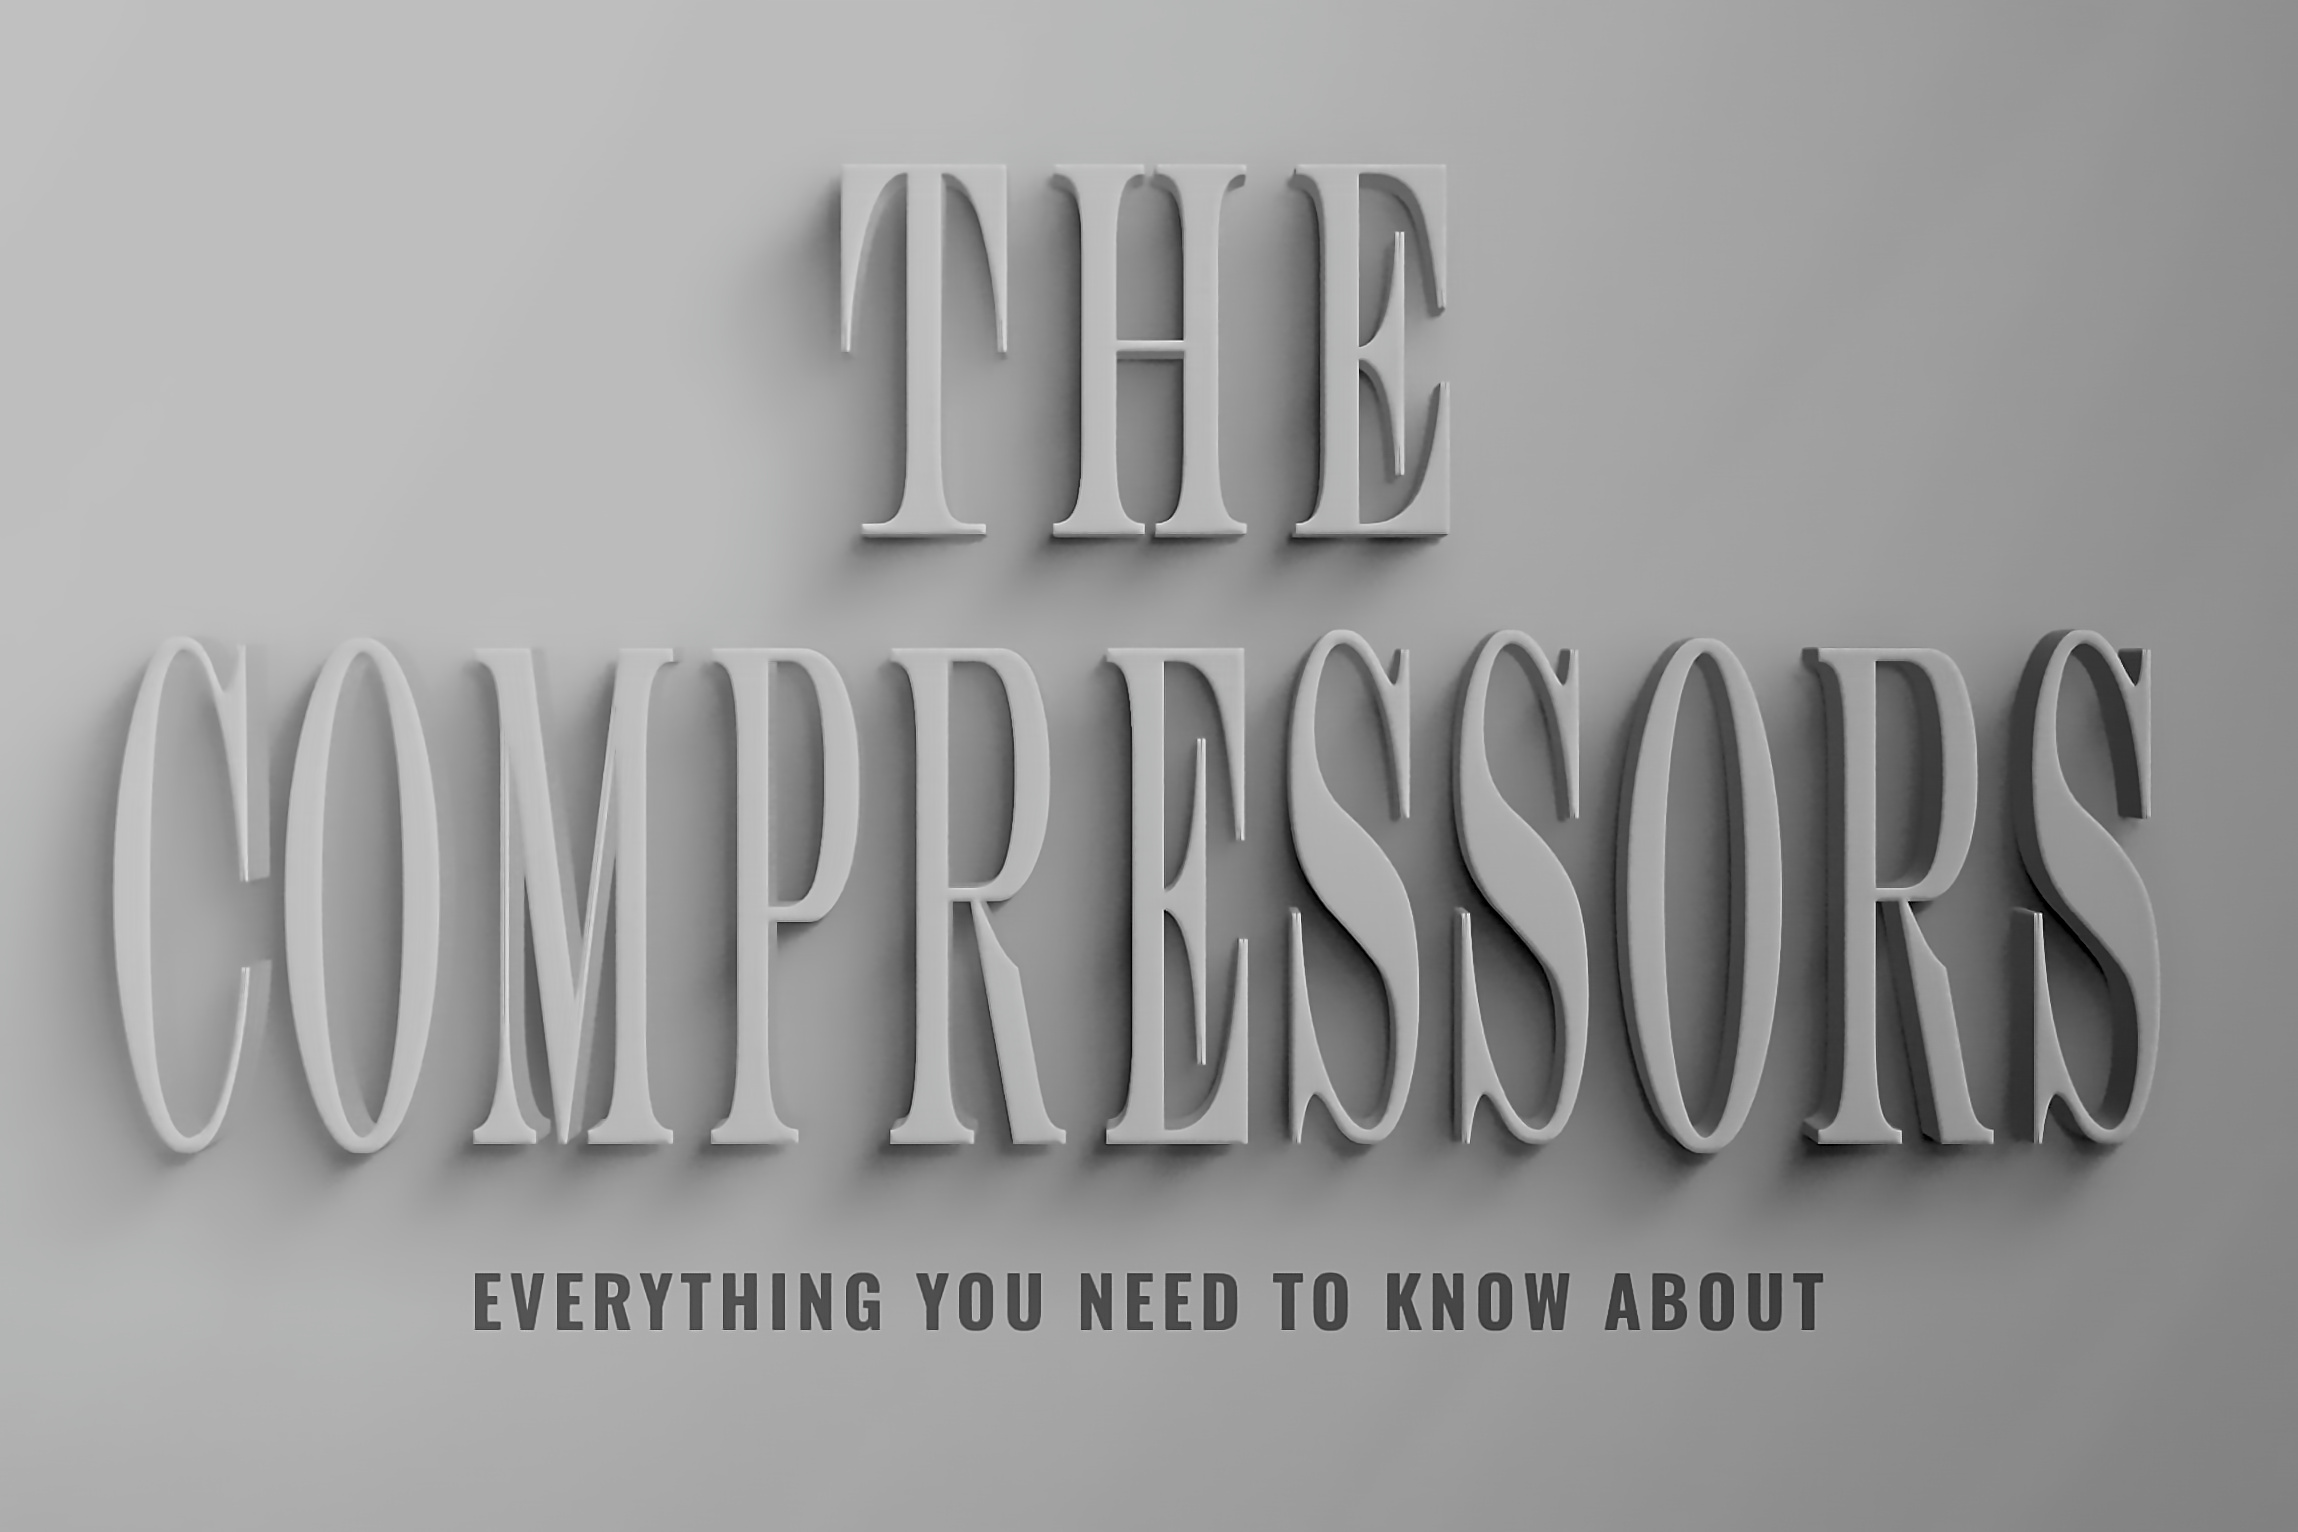 Compressors – Everything you need to know about